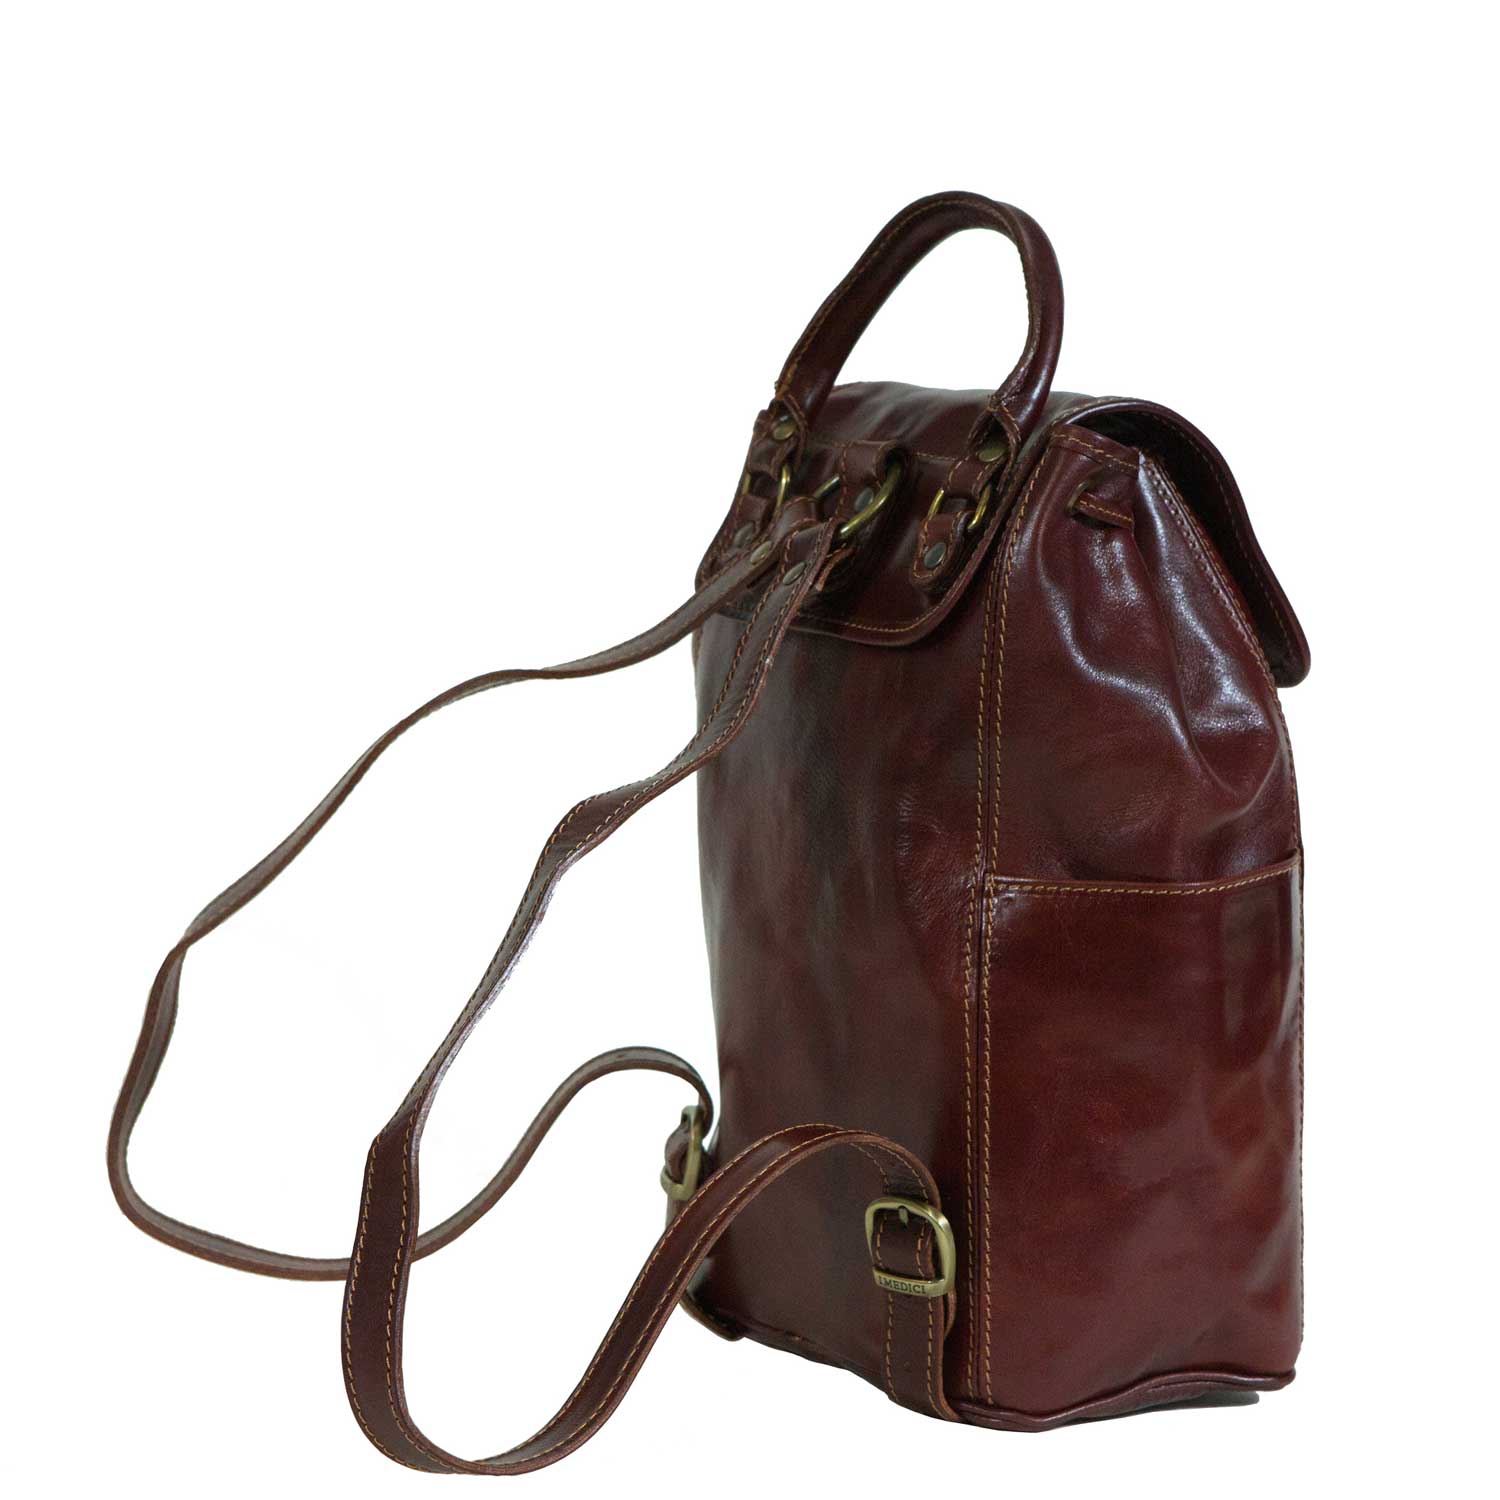 Cuoio Backpack, Italian Leather, Made in Italy - My Italian Decor